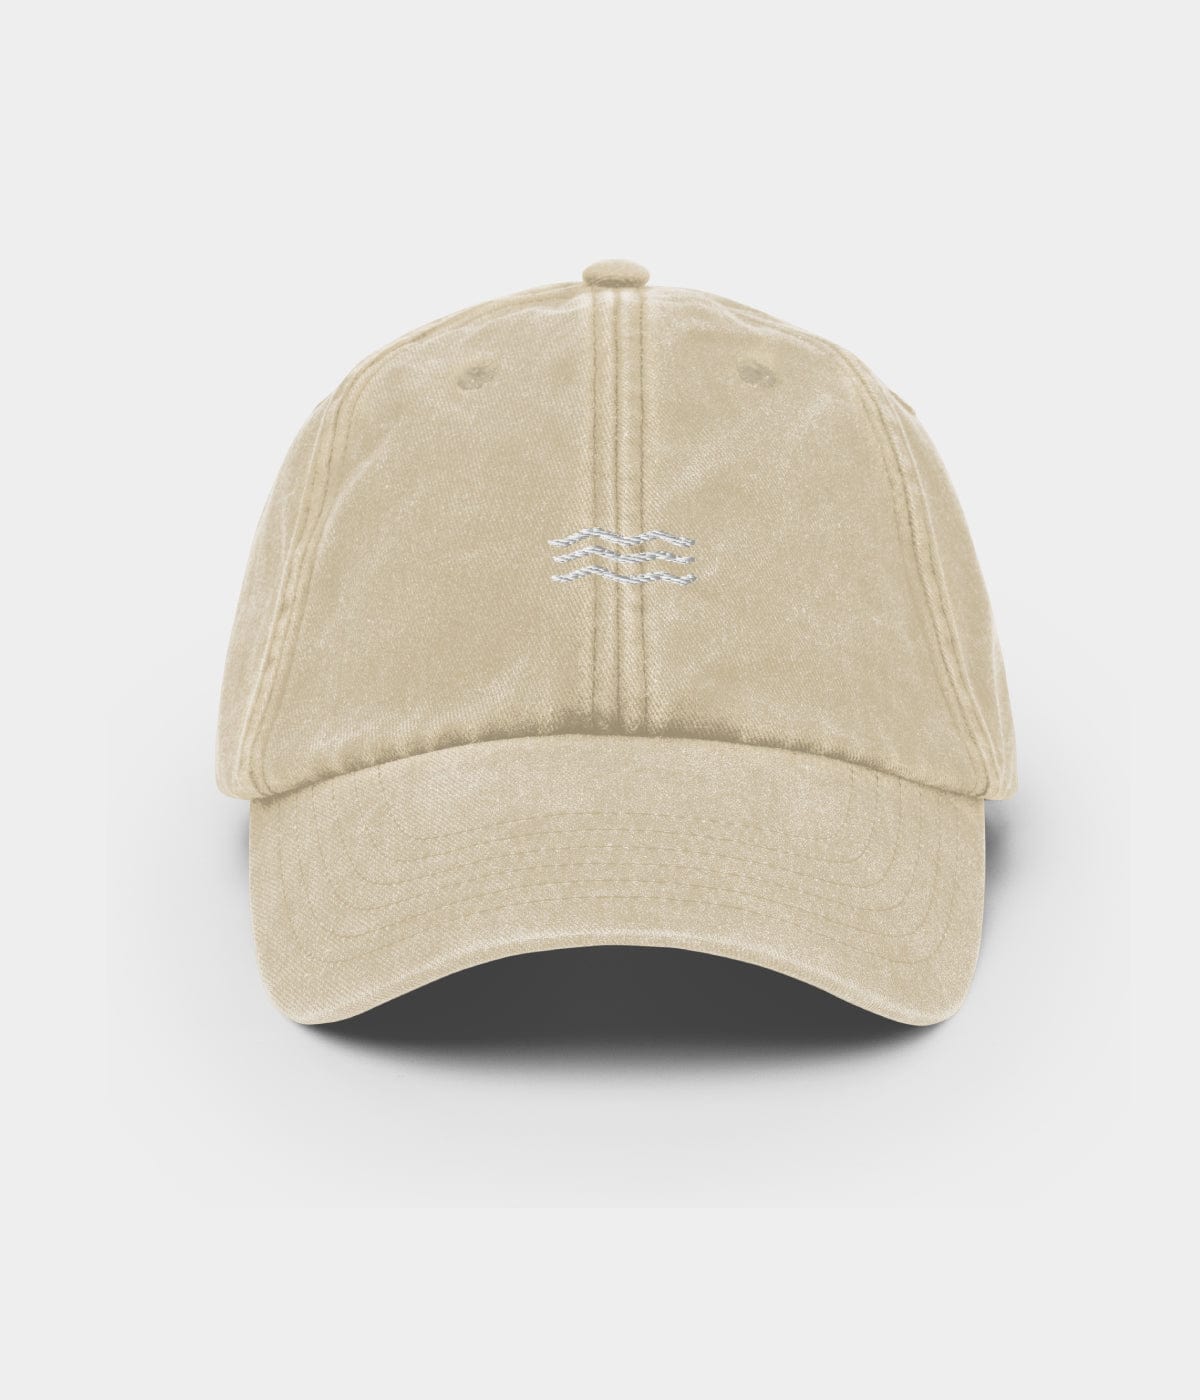 WASHED SEA. | High quality produced by CAPS Apparel